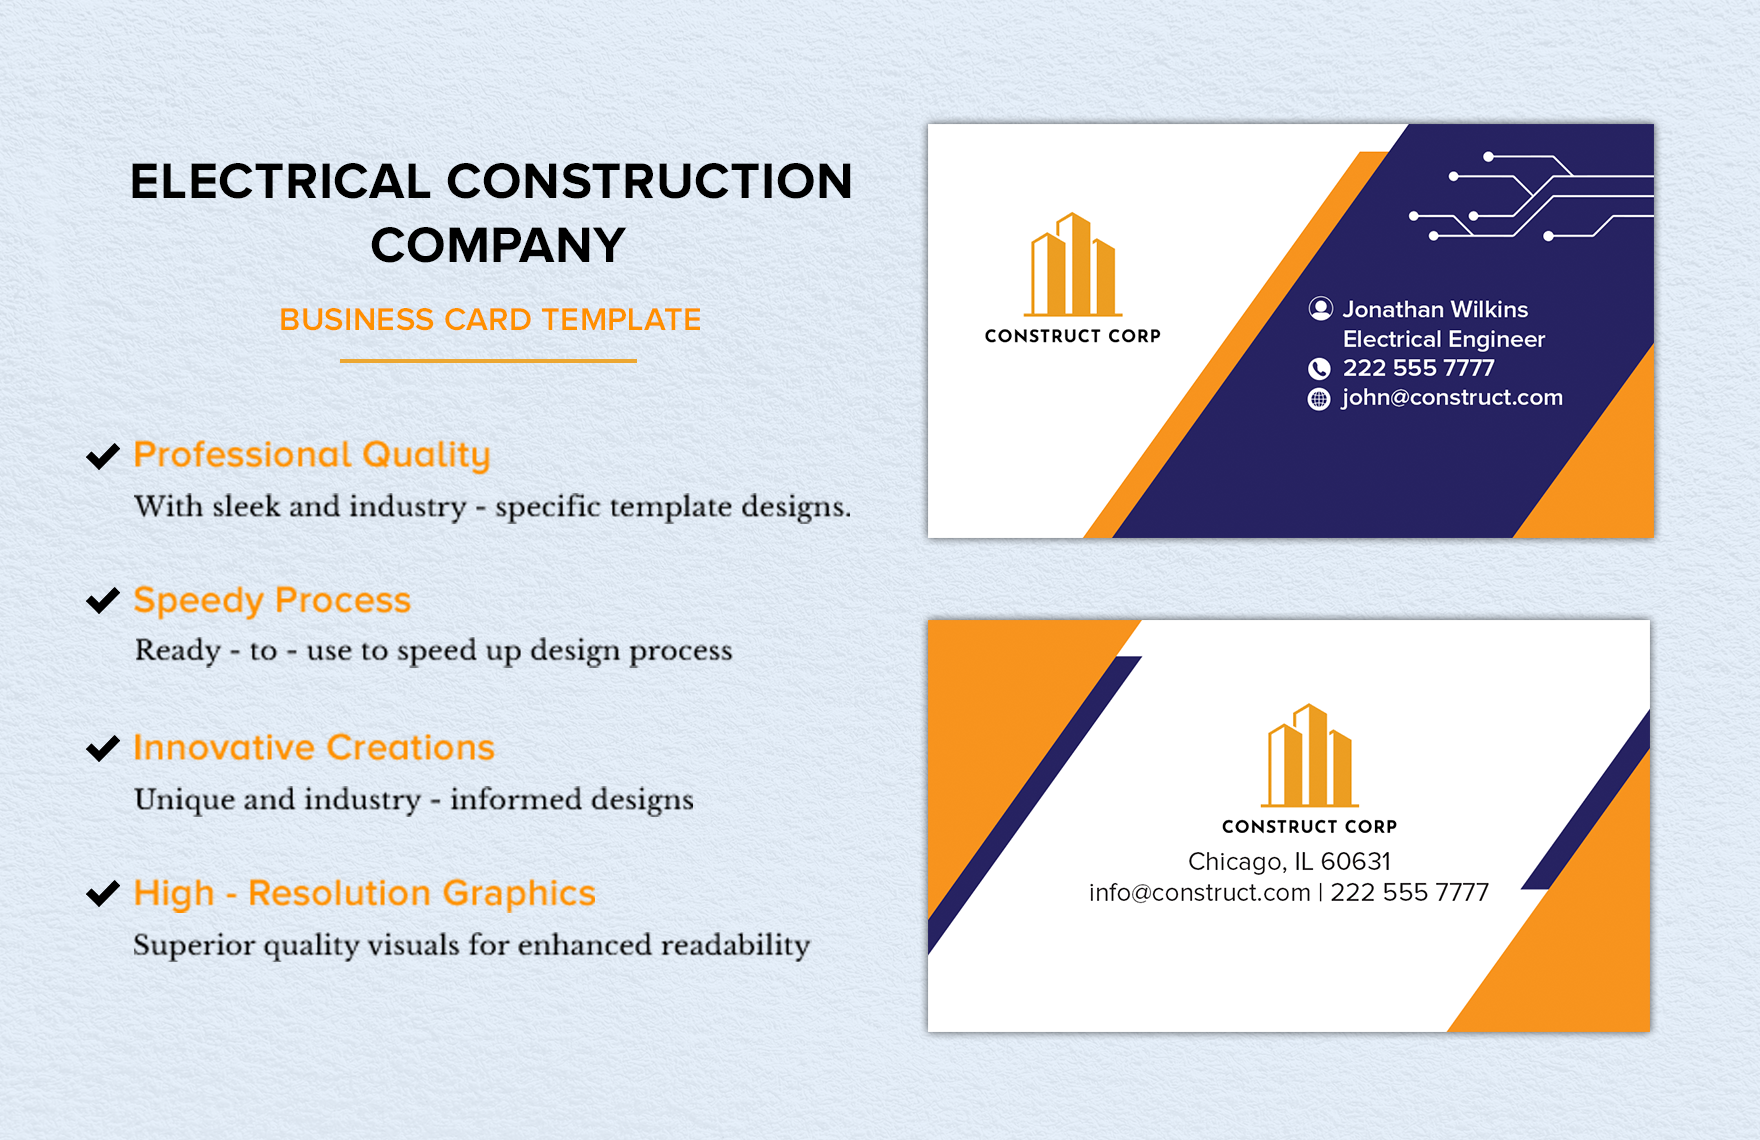 Electrical Construction Company Business Card Template